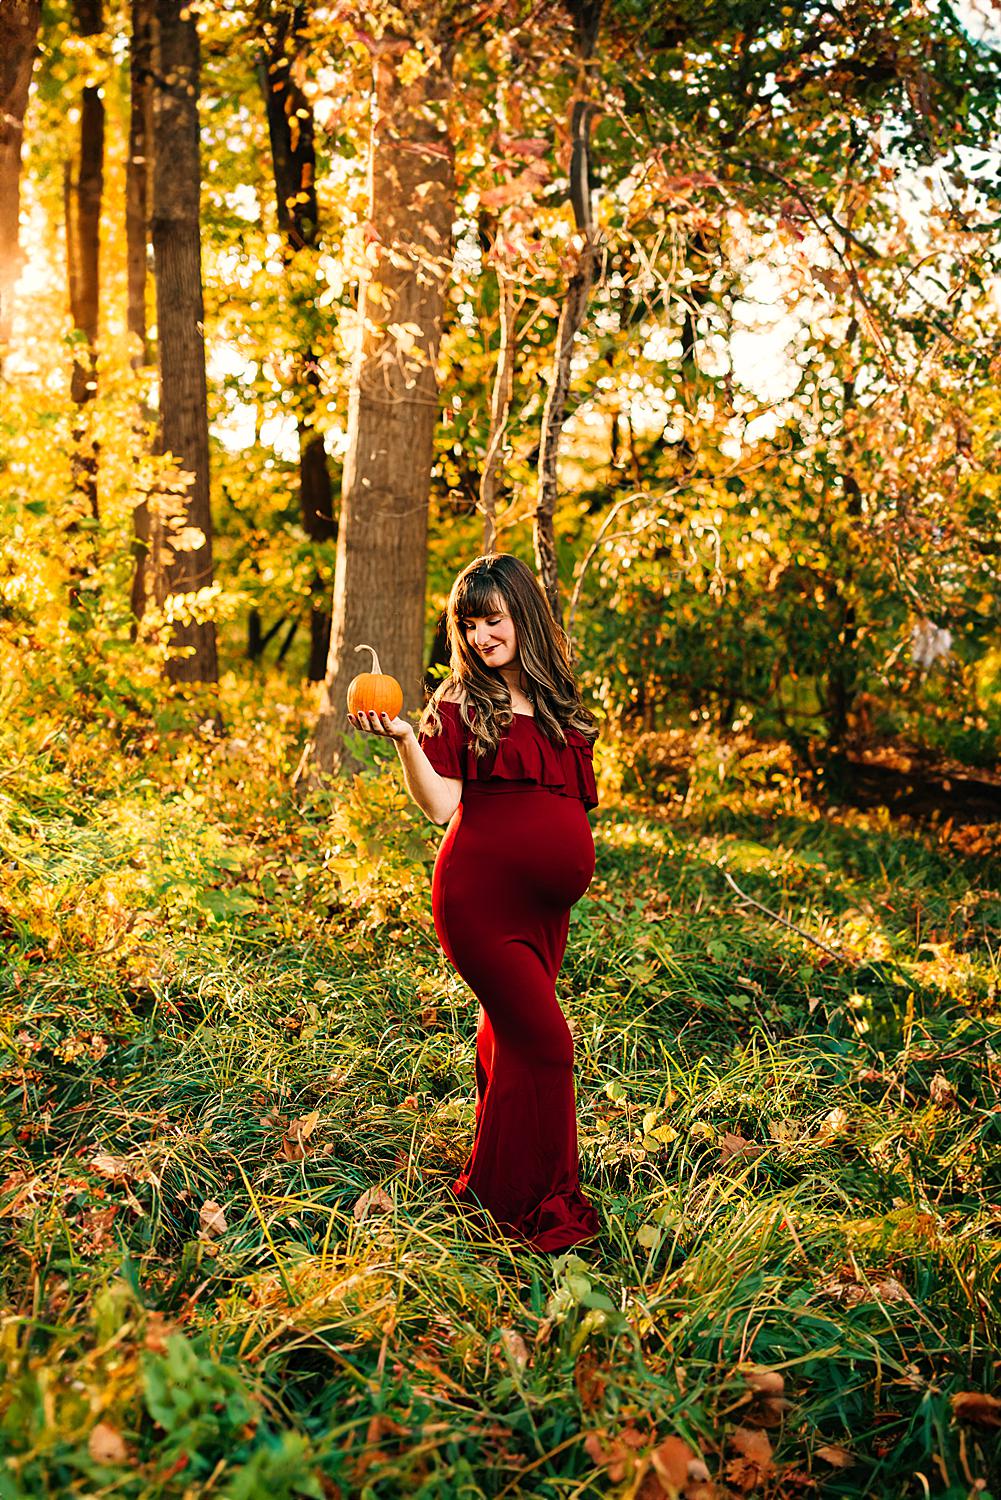 Maternity photographer documents expectant mother at Inniswood Garden in Westerville during peak foliage